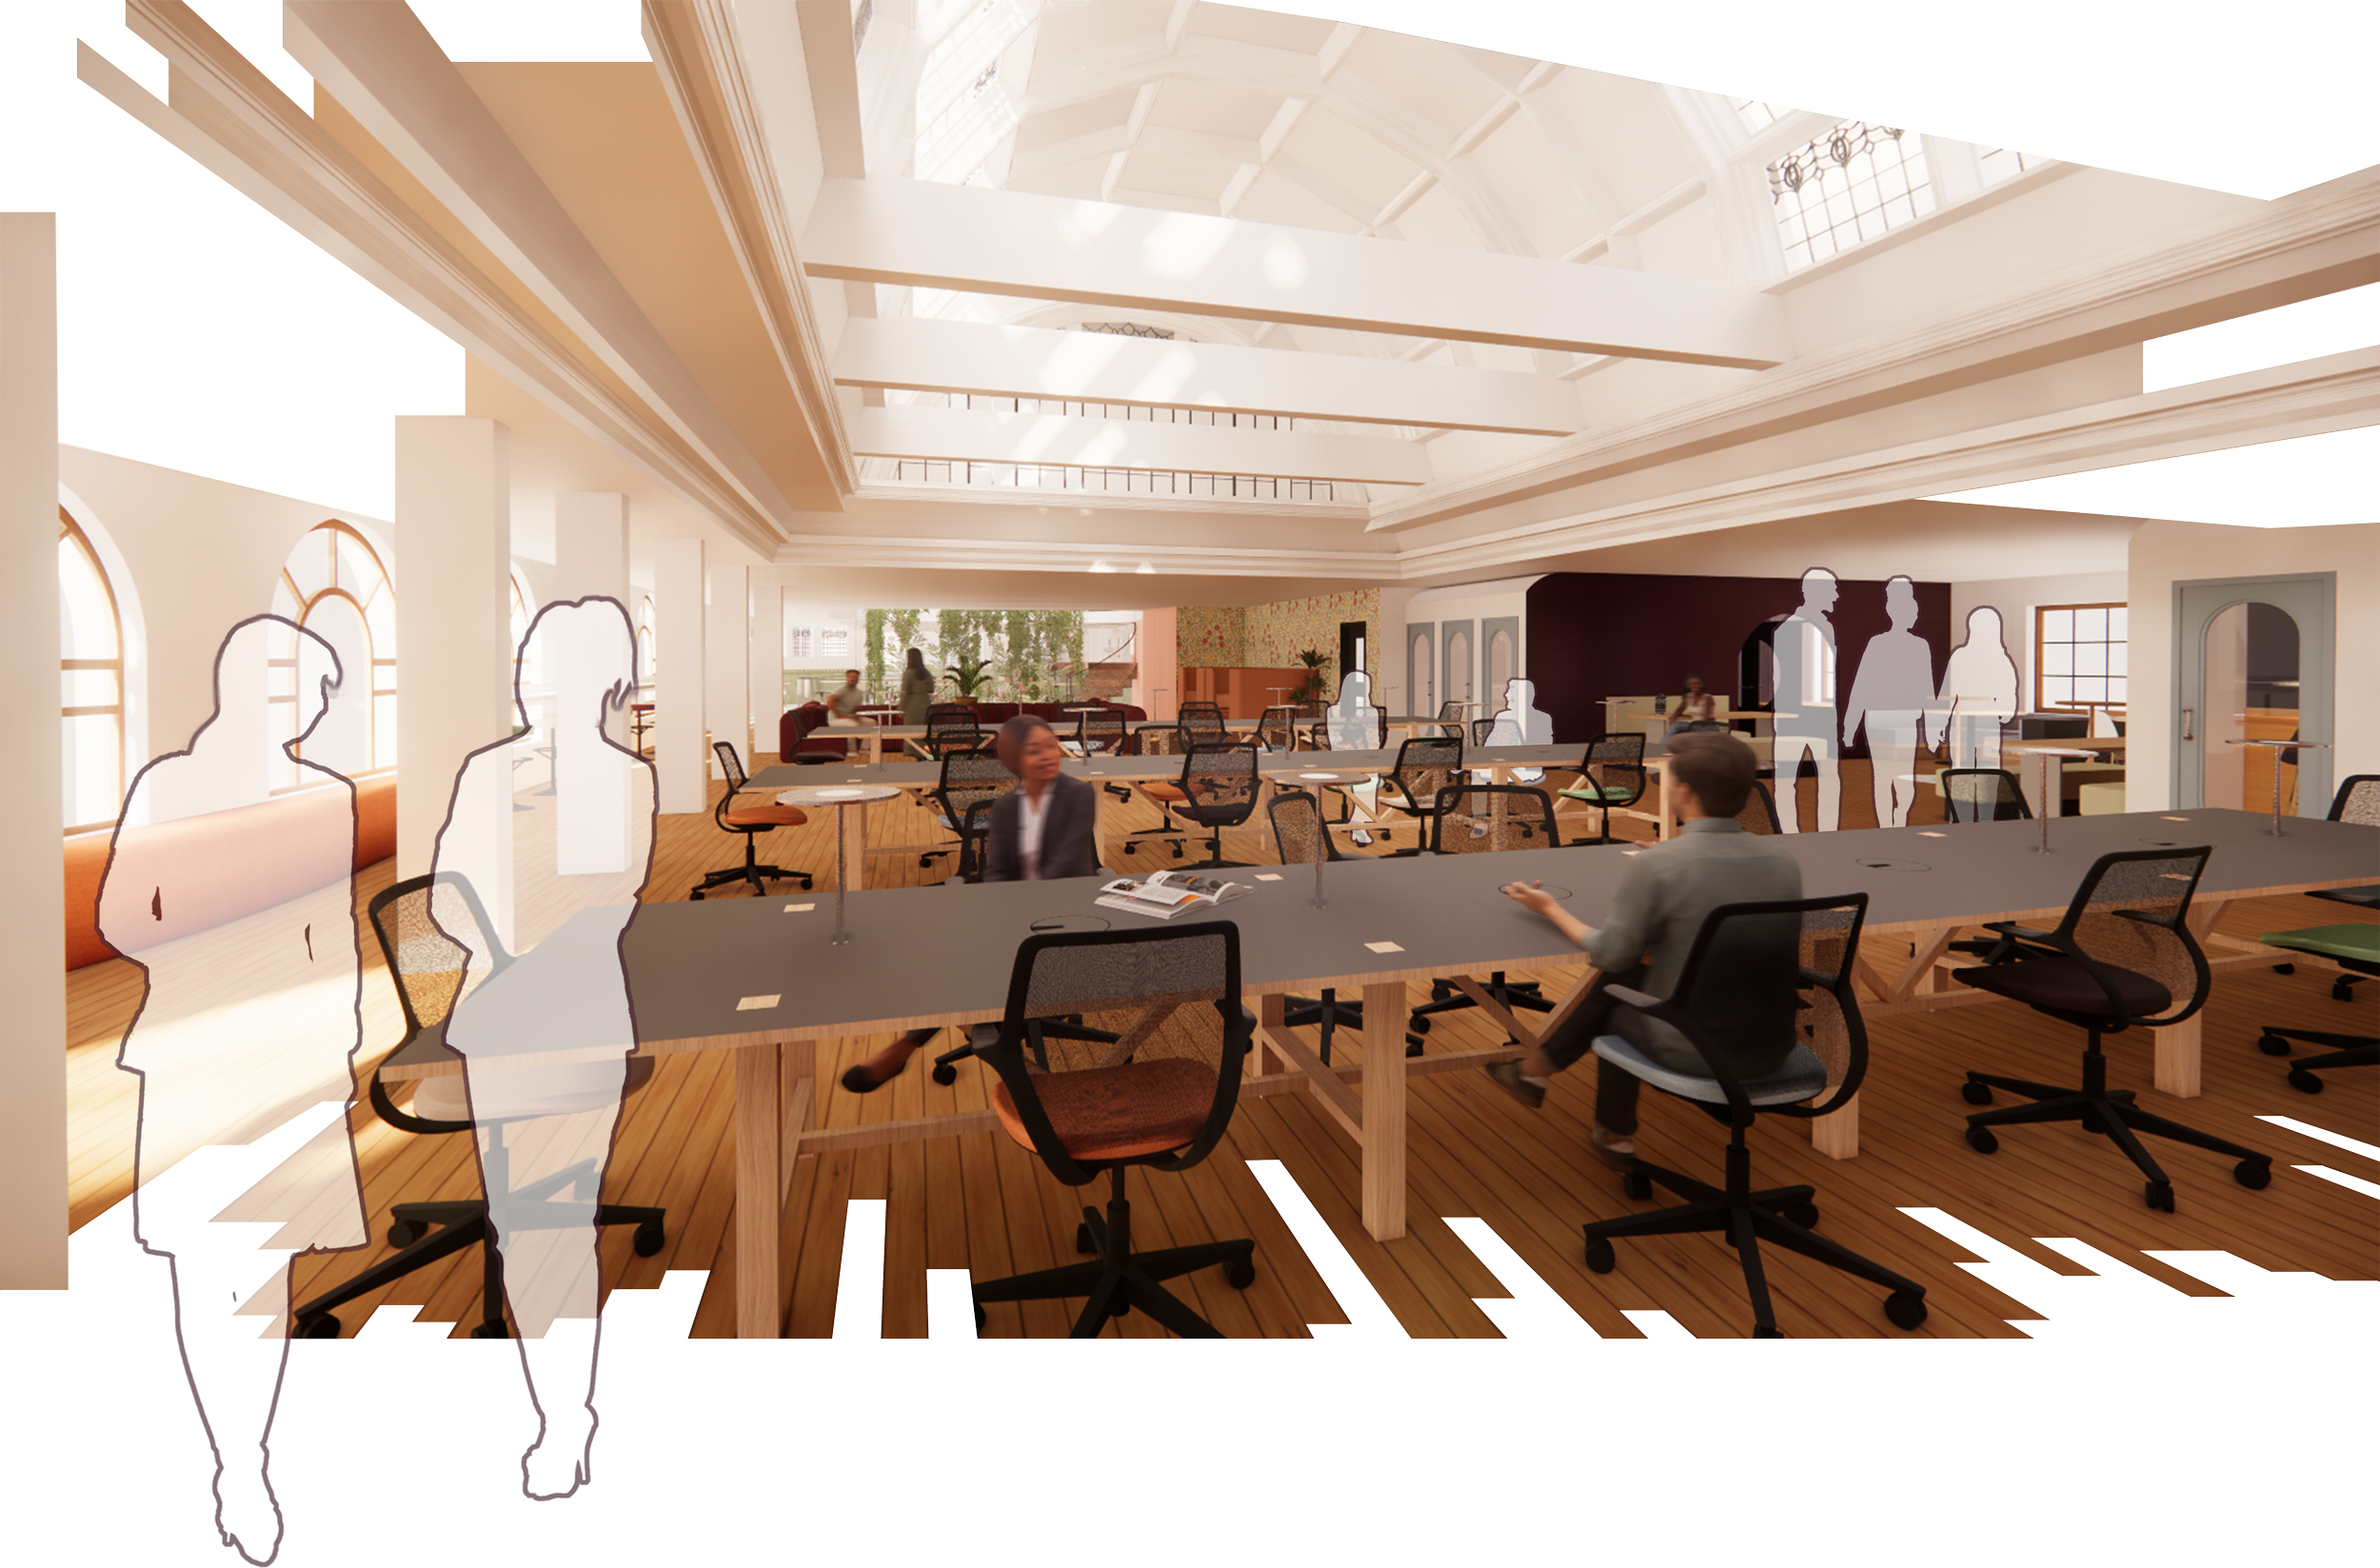 Rendered image depicting an open workspace with a barrel vault ceiling, long tables, colourful desk chairs and silhouette figures working and talking.